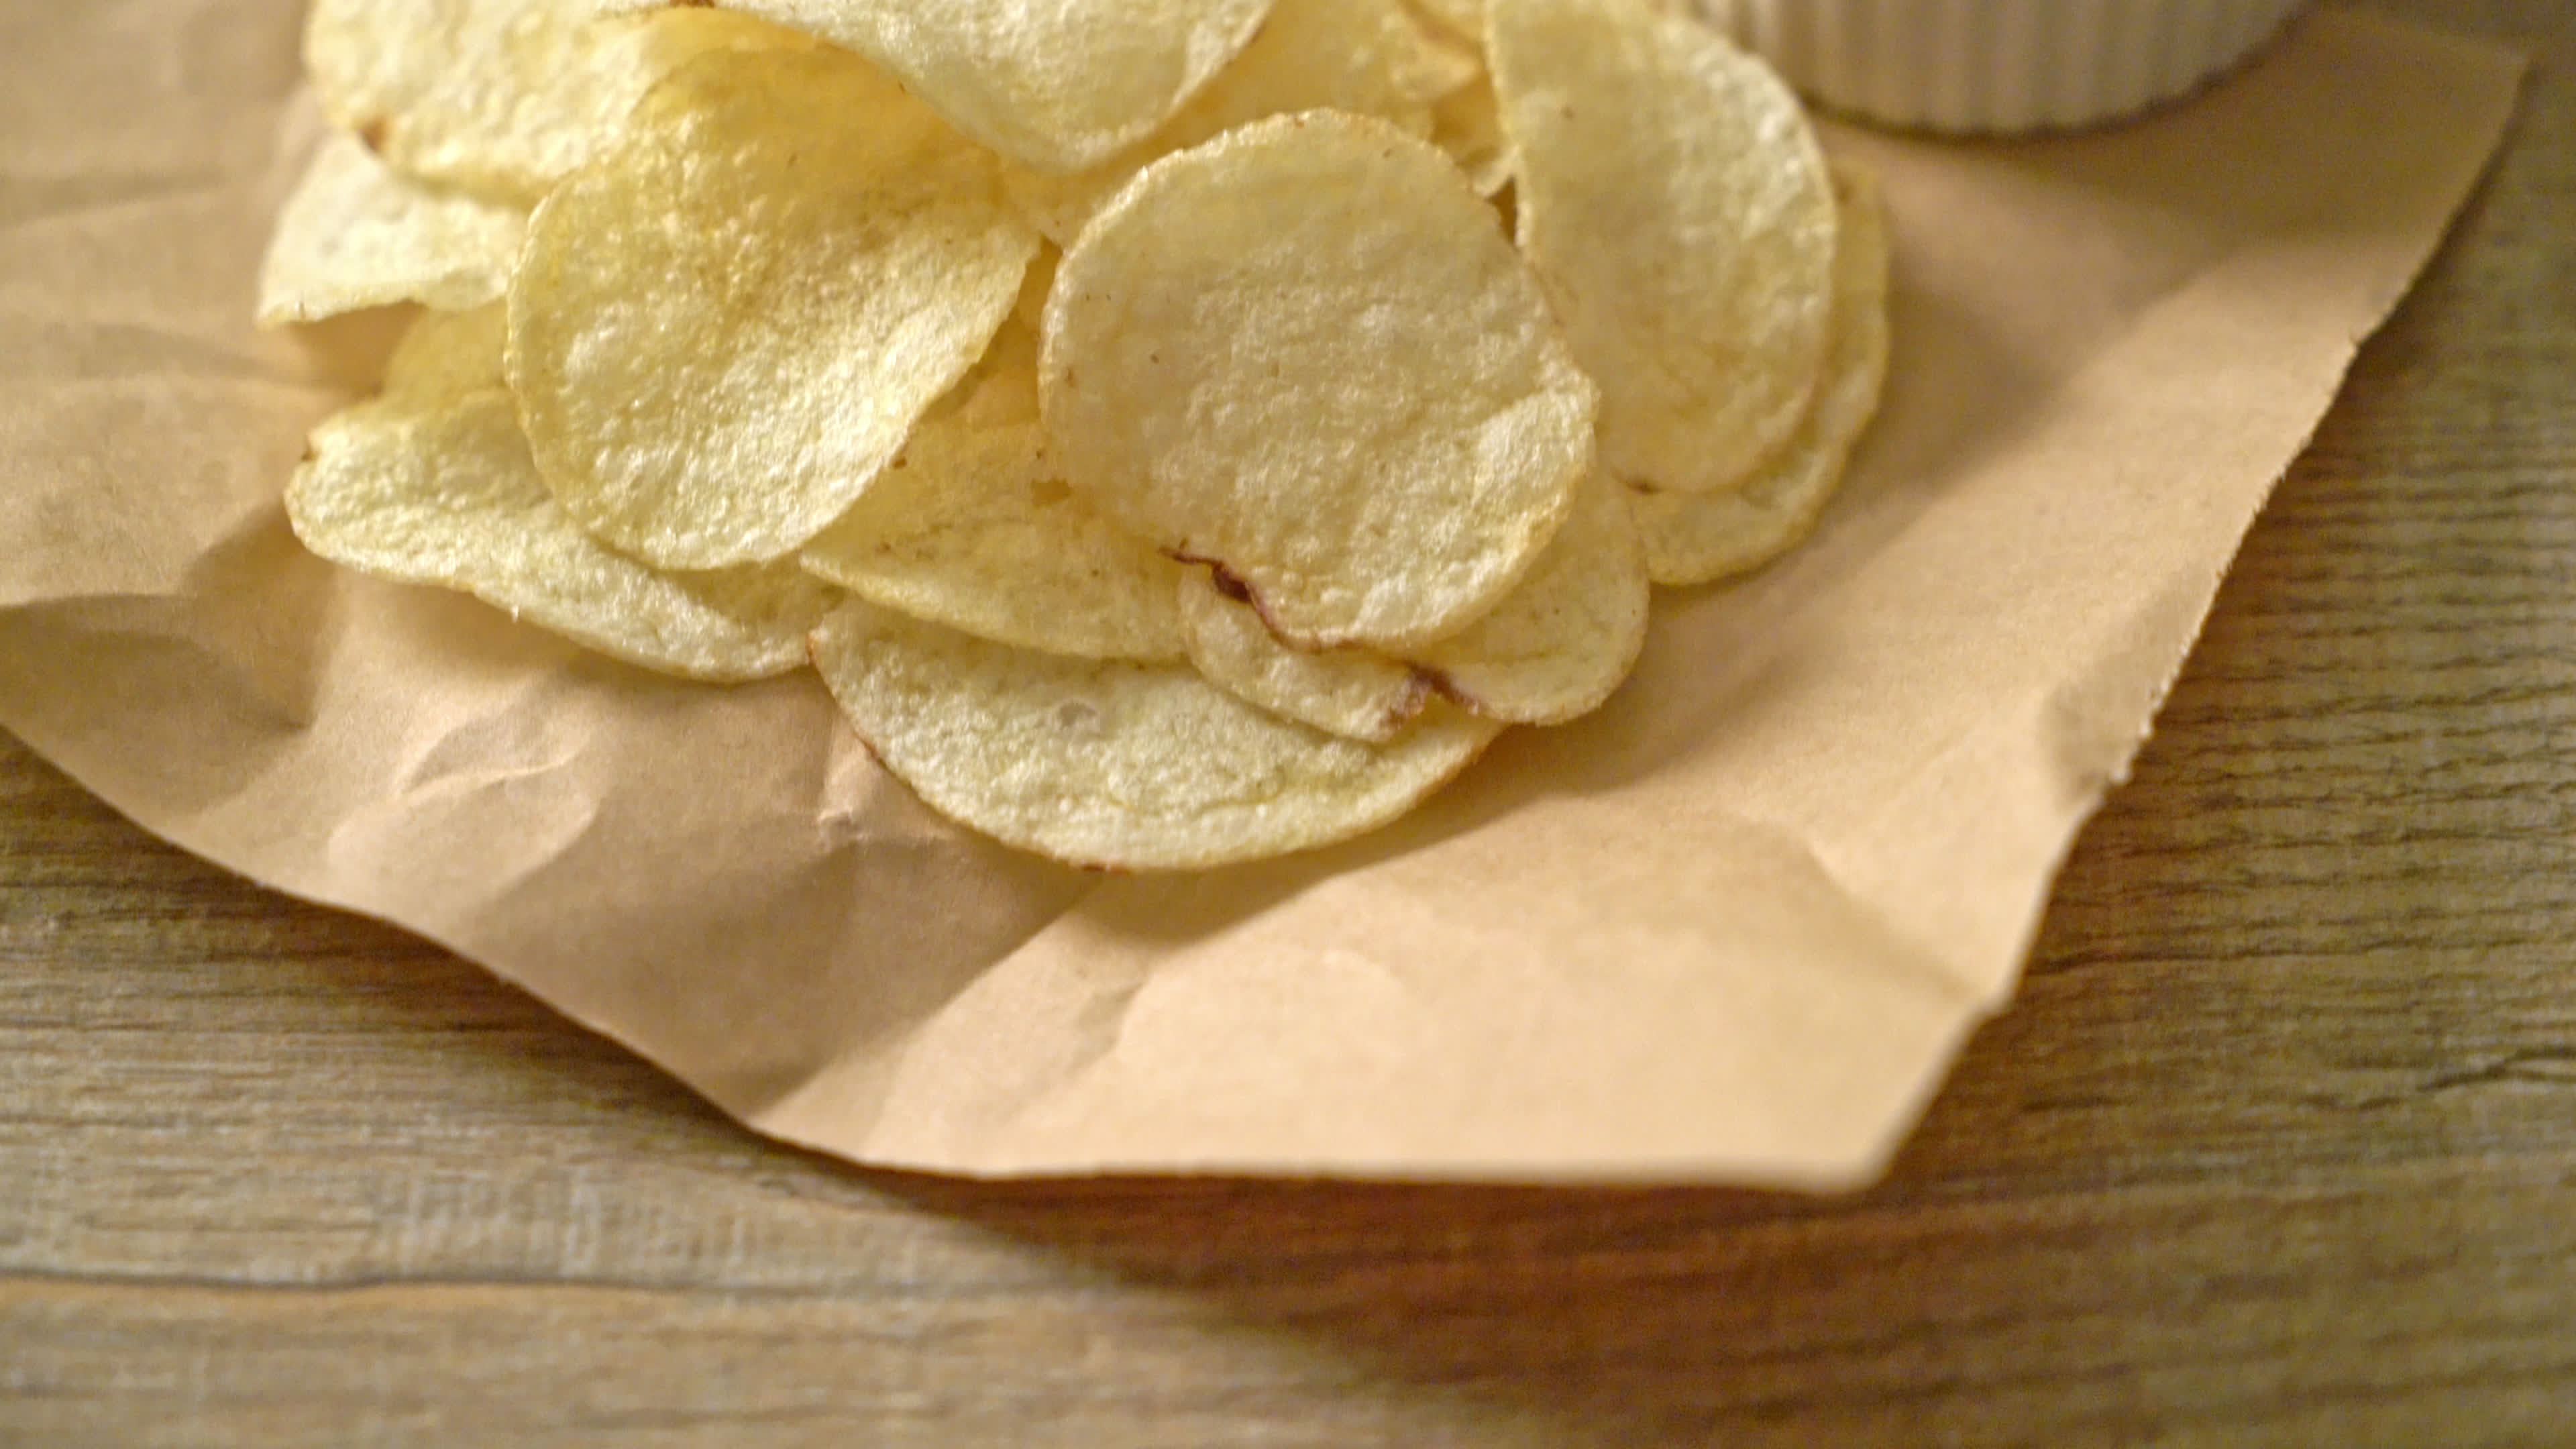 Potato chips with dipping sauce, Flavorful indulgence, Stock video footage, Savory delight, 3840x2160 4K Desktop